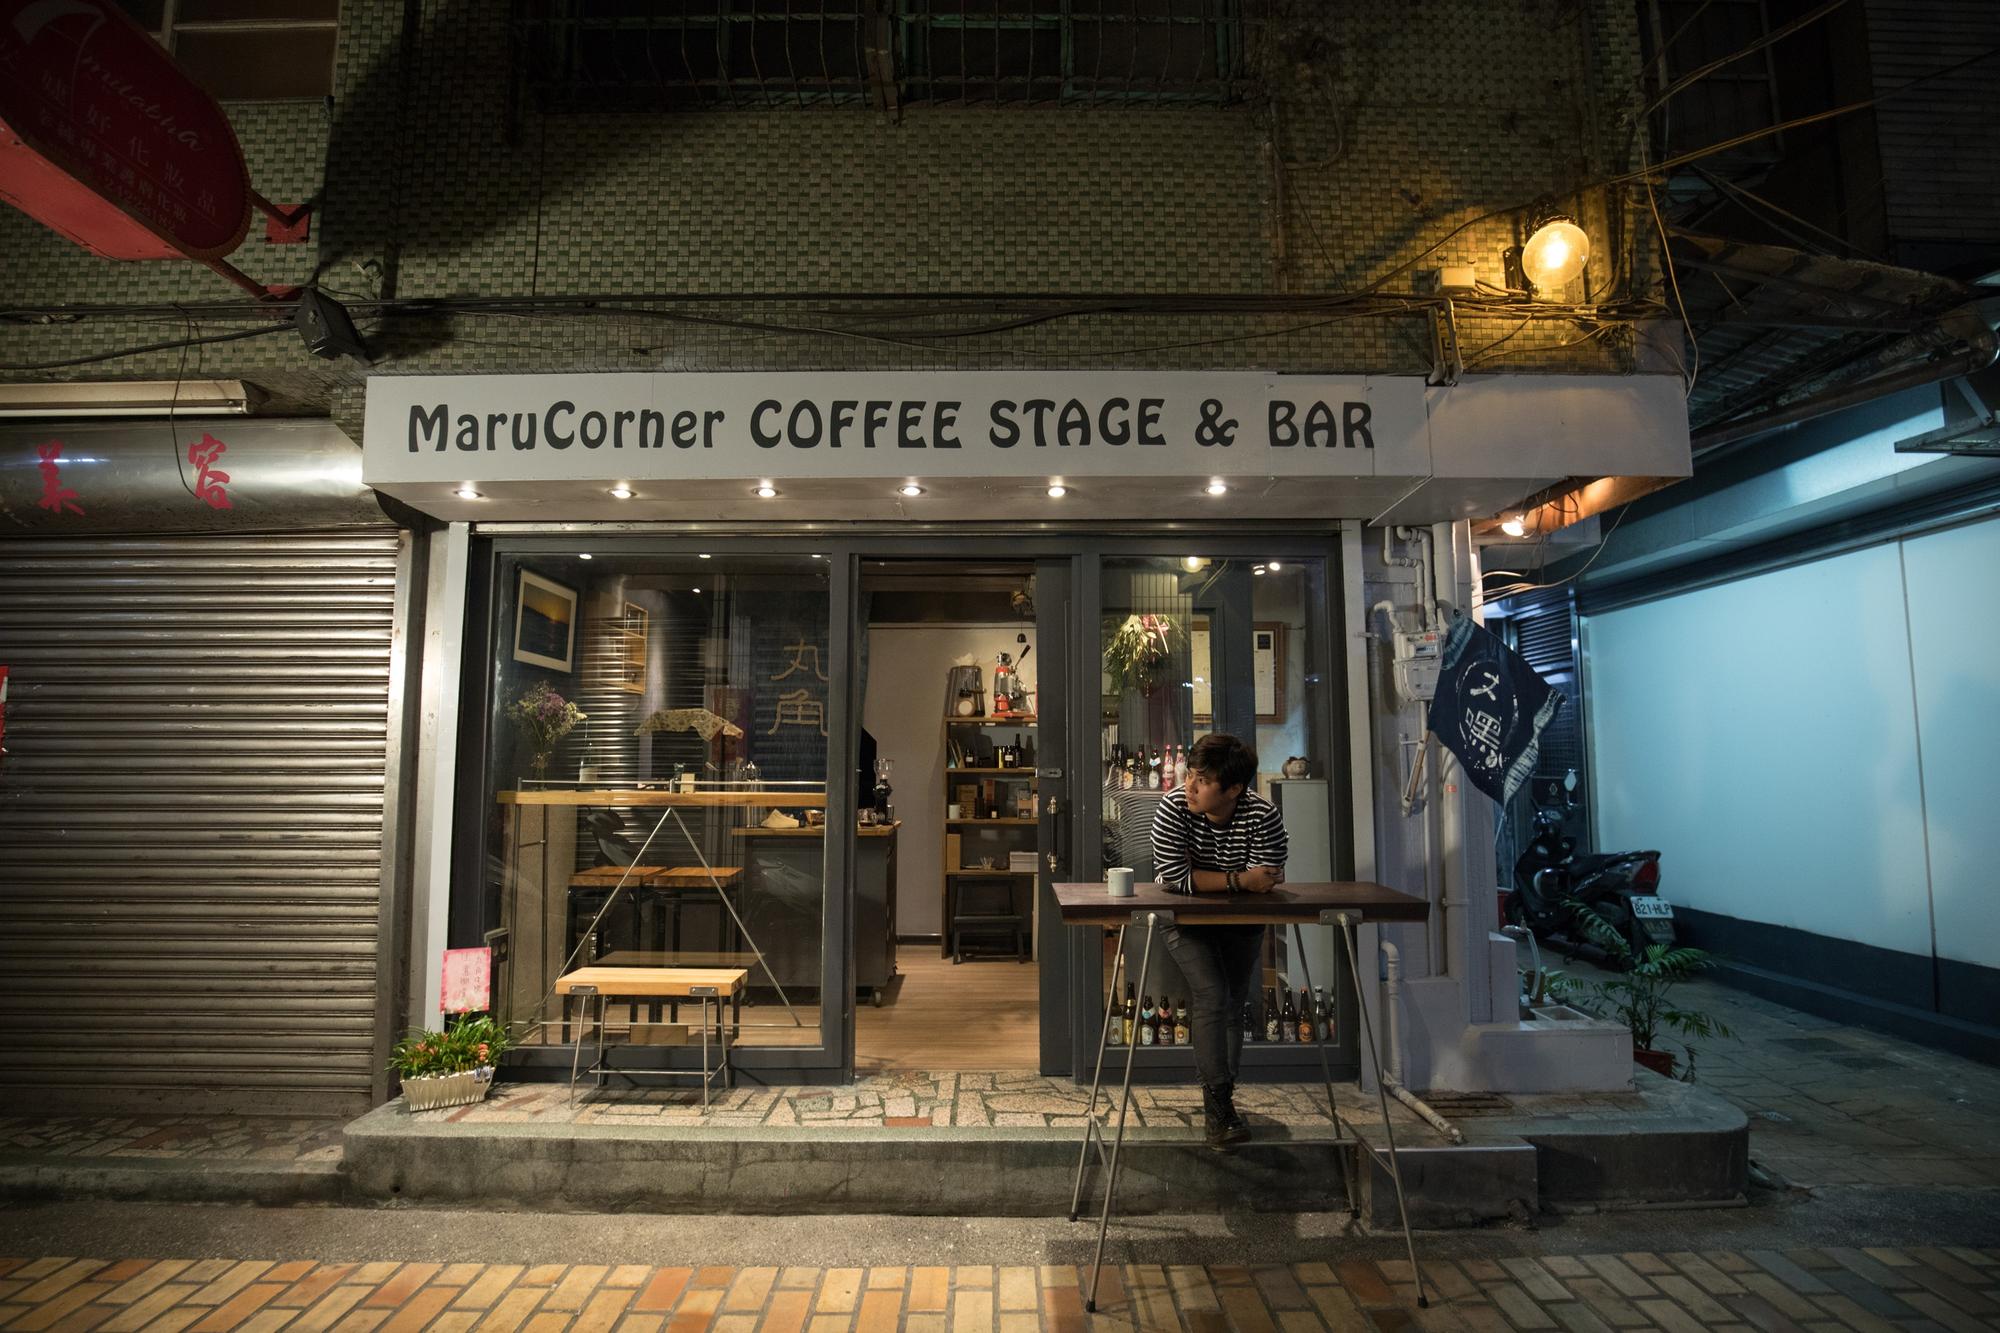 I walked into the alley to find six hidden cafes in Keelung.